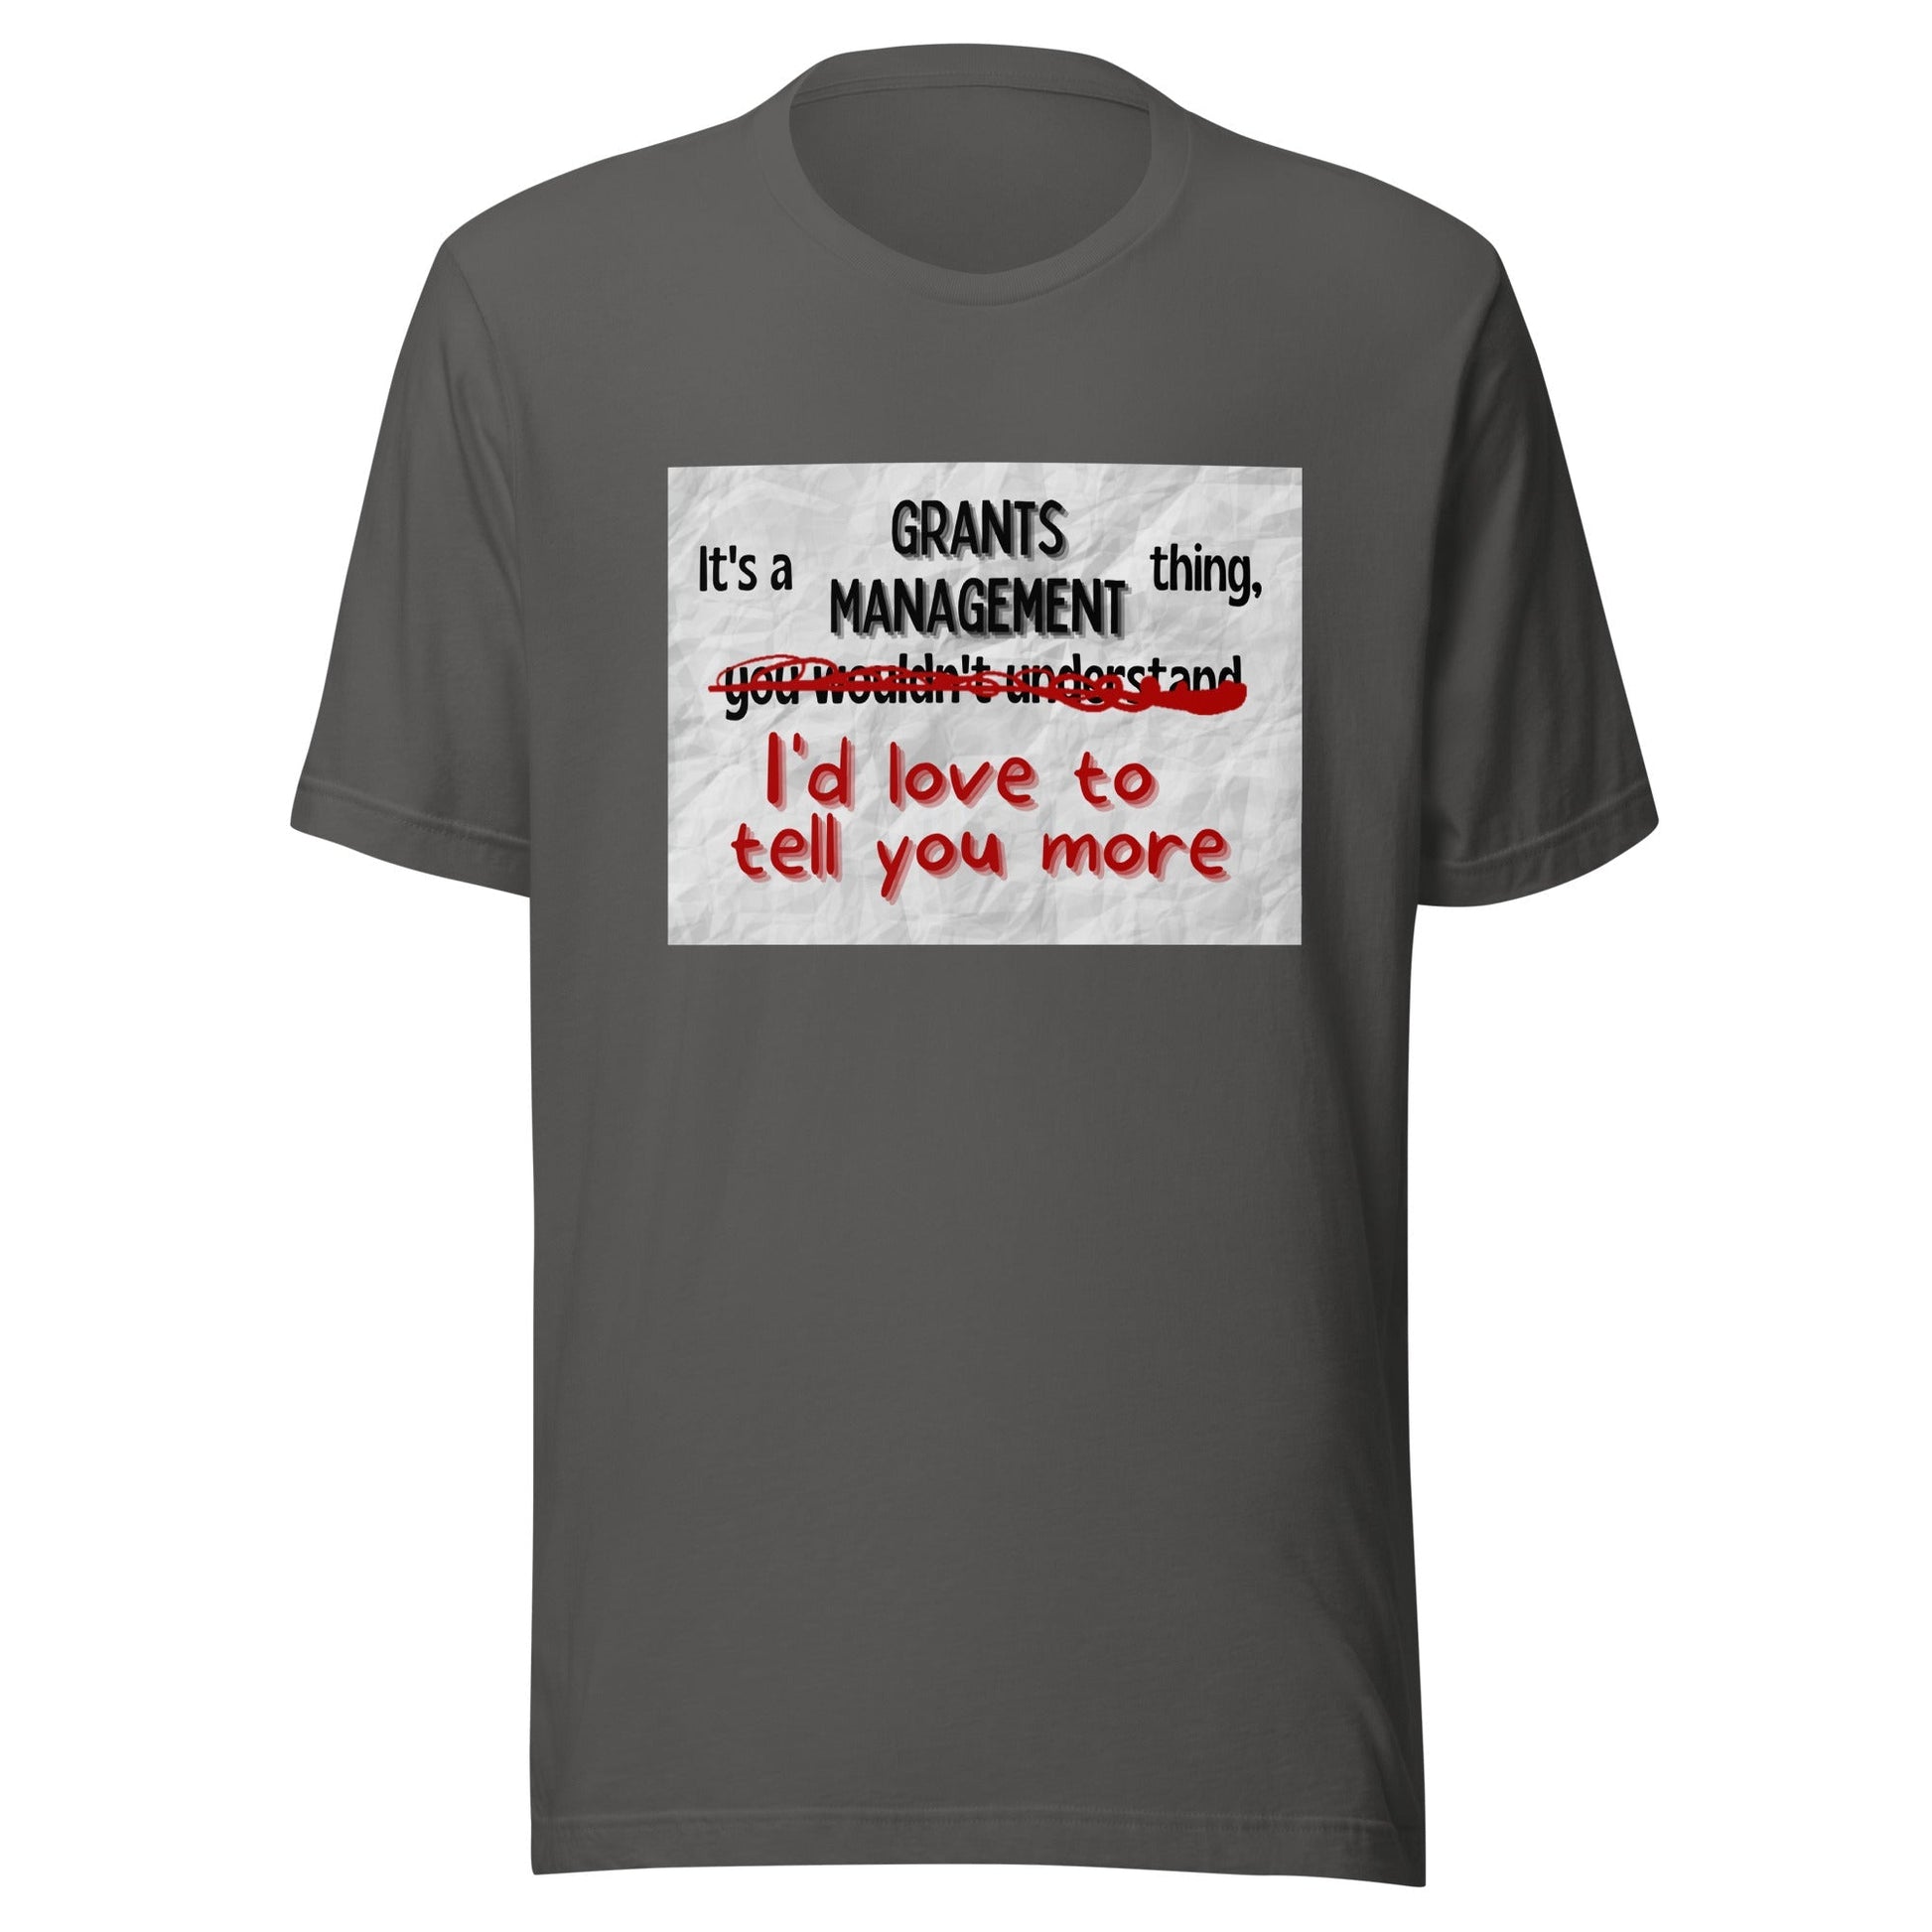 It's a Grants Management Thing Unisex t-shirt-recalciGrant